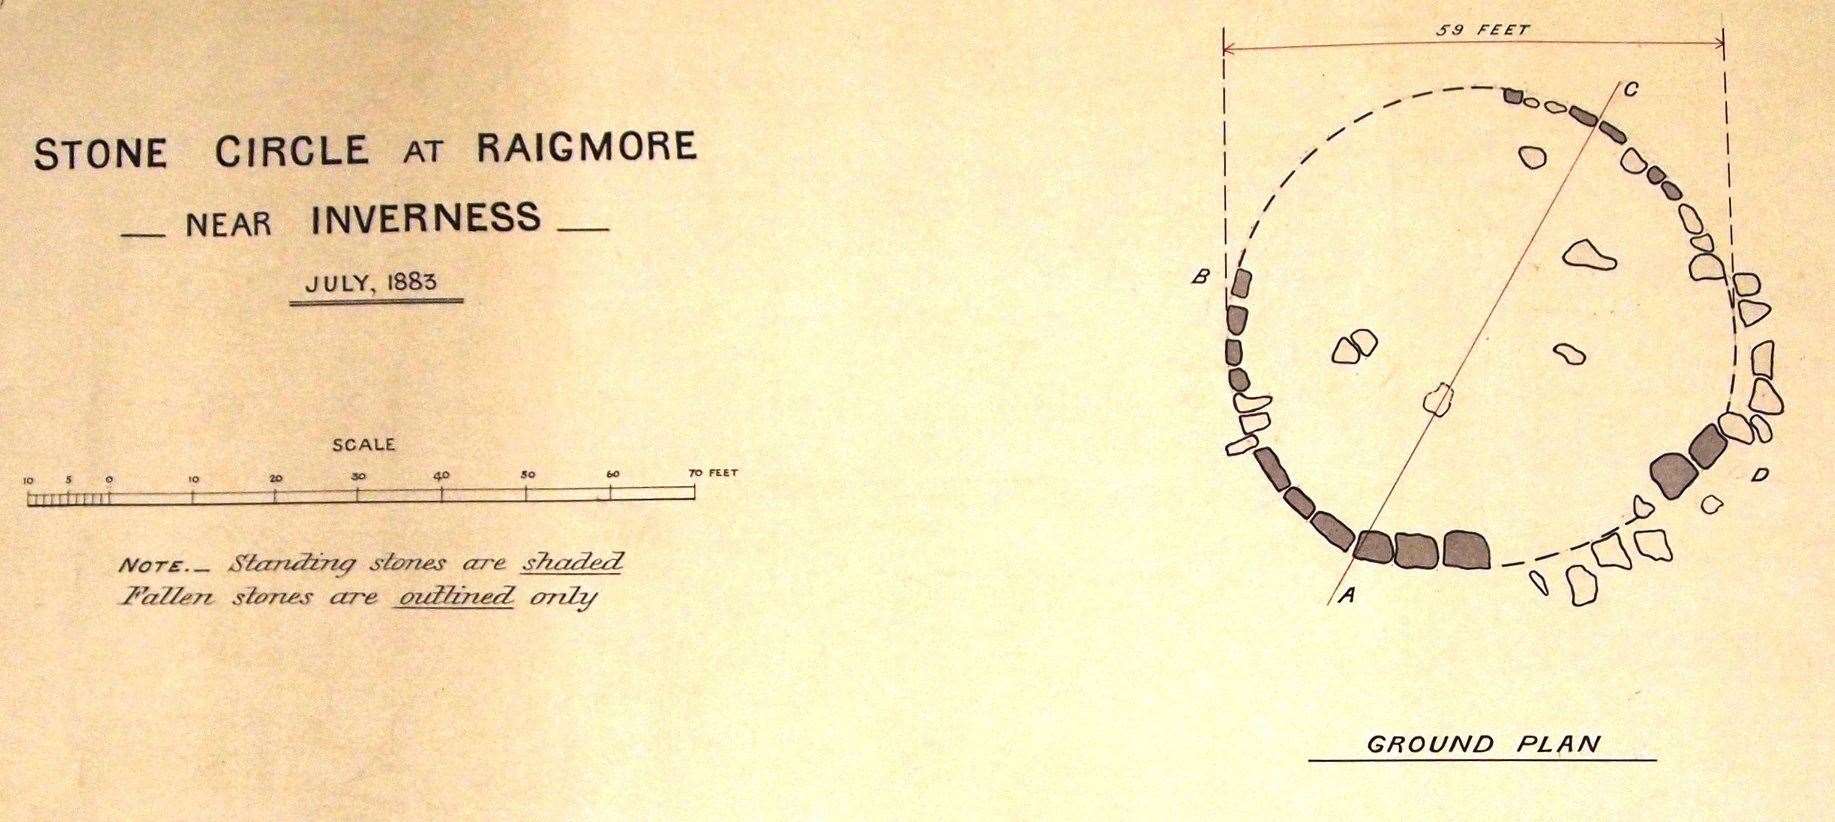 The Inverness Scientific Society and Field Club's plan of the stone circle at Raigmore, near Inverness, 1883.